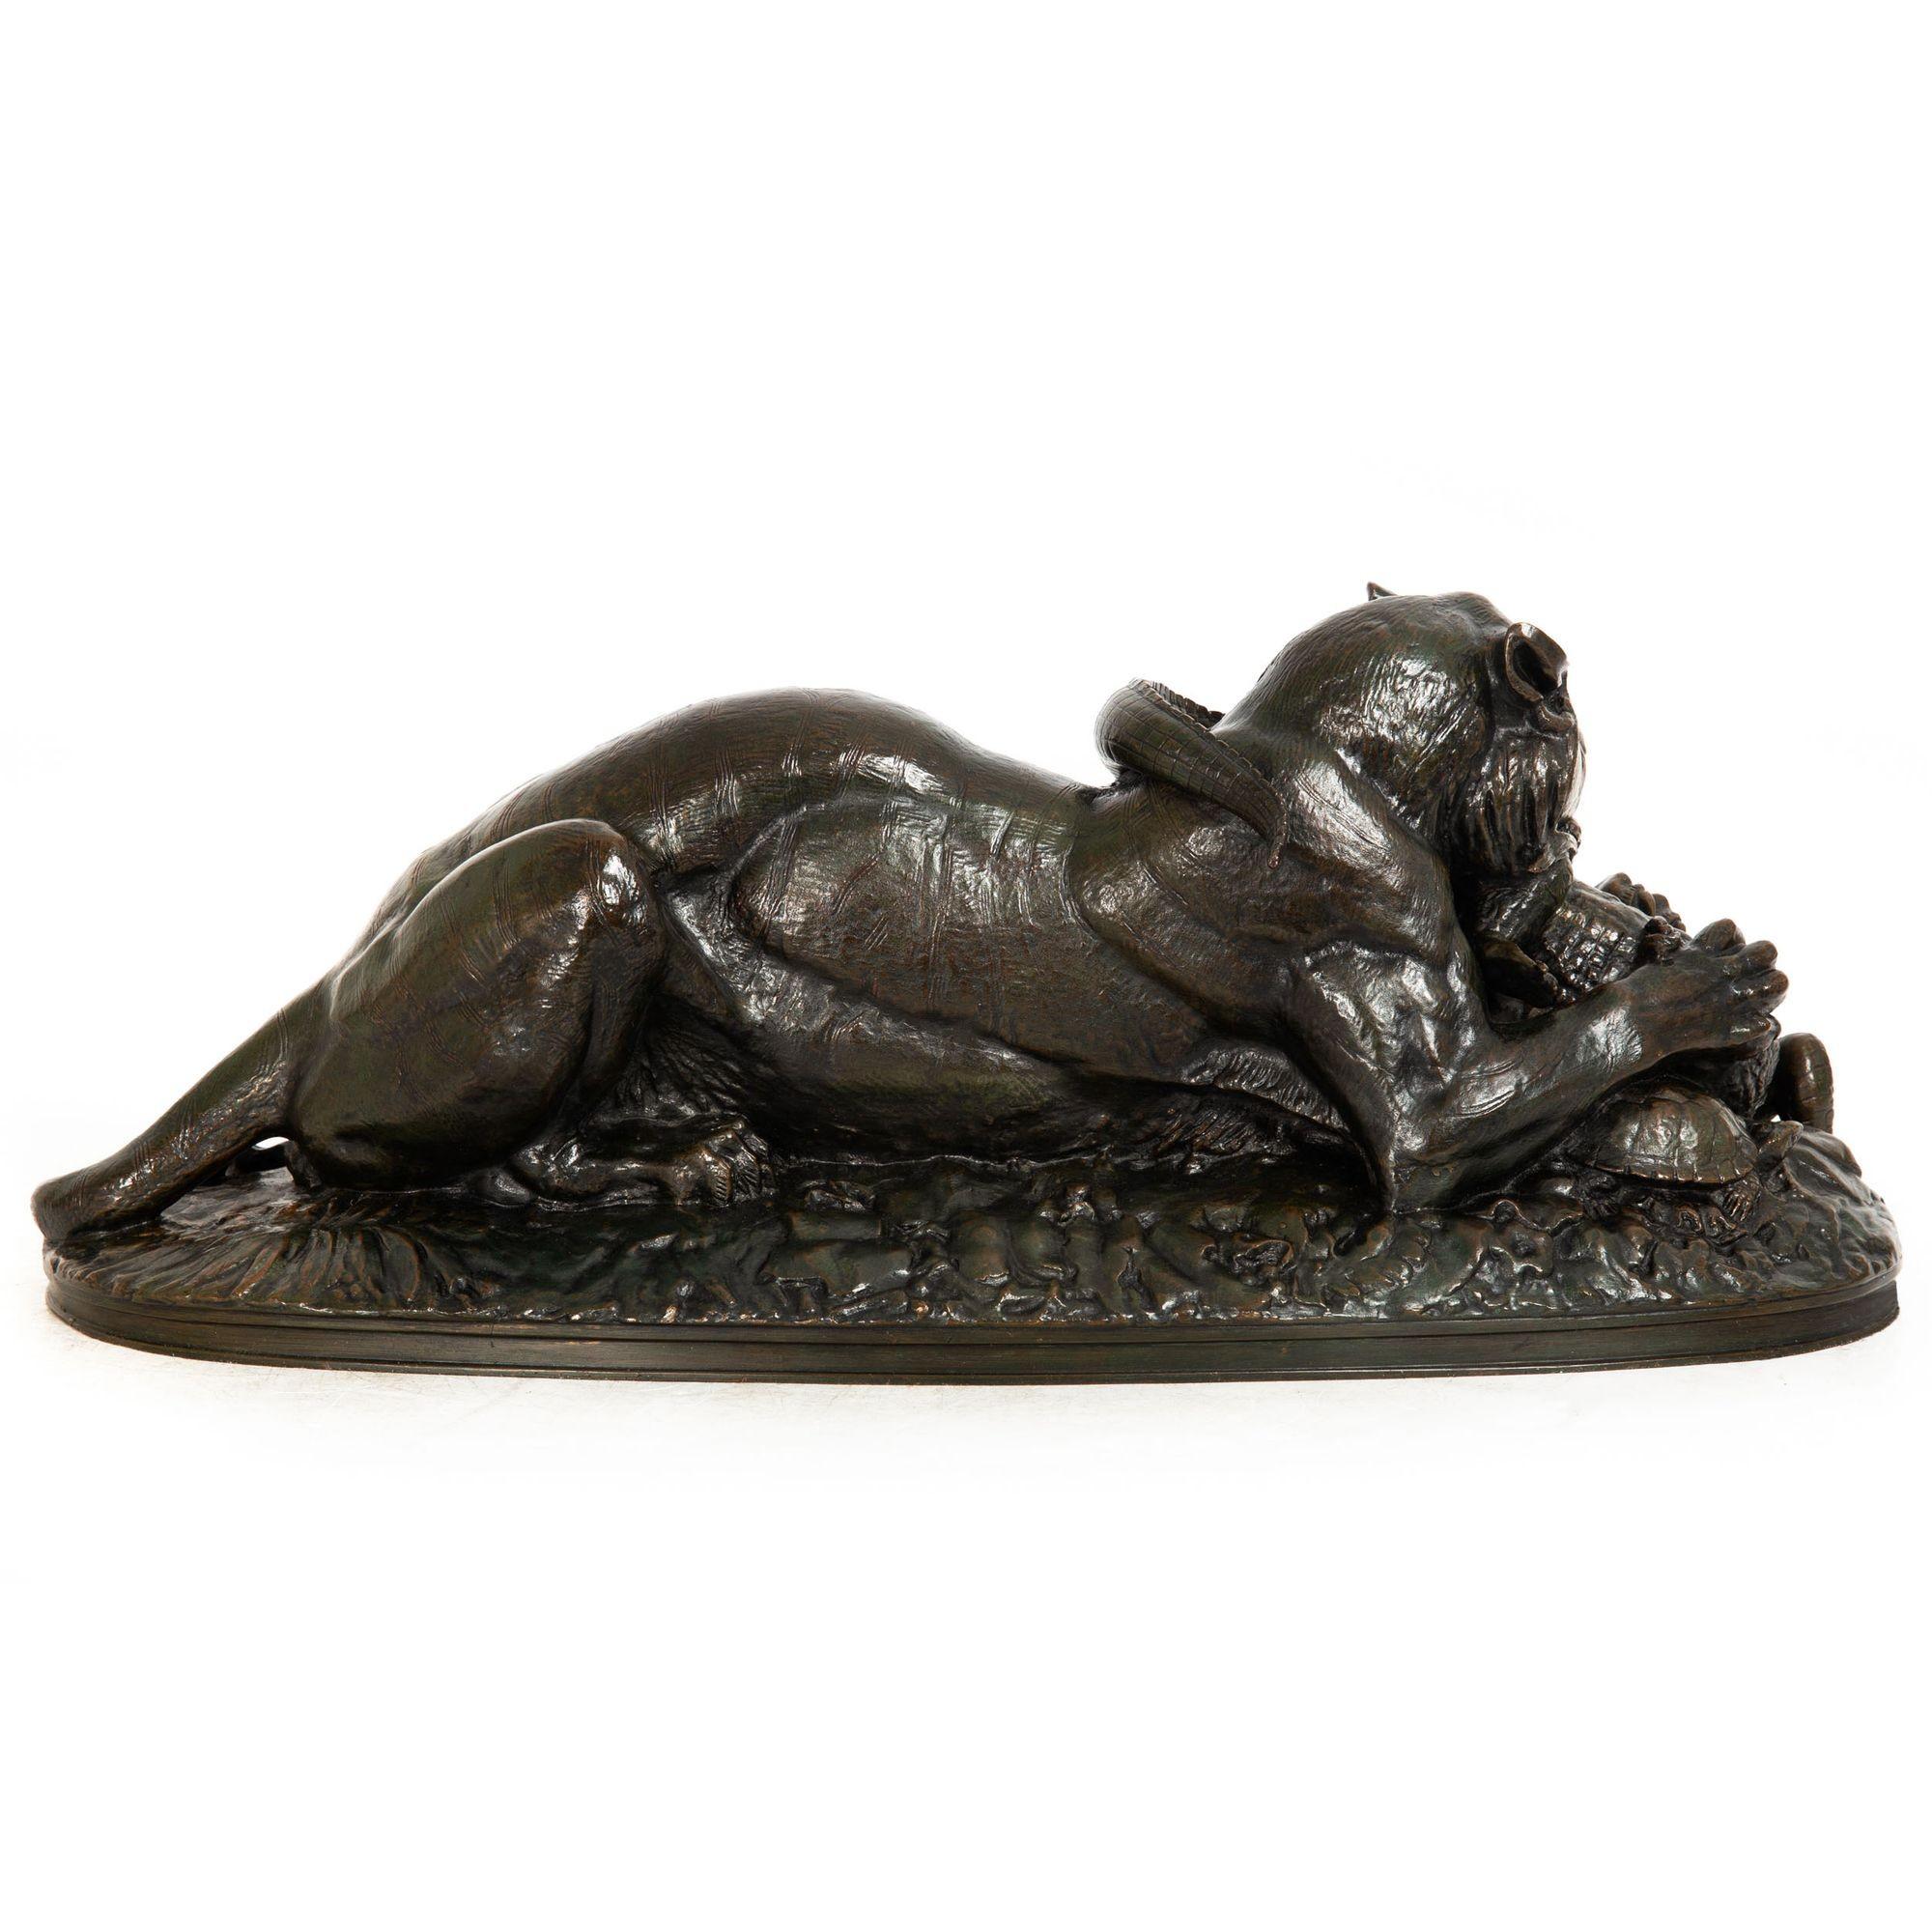 ANTOINE-LOUIS BARYEFrench, 1796-1875Tiger Devouring a Gavial Crocodile of the Ganges (premiére reduction)Patinated sand-cast bronze  modeled in 1831, cast posthumously circa 1890, signed in cast 